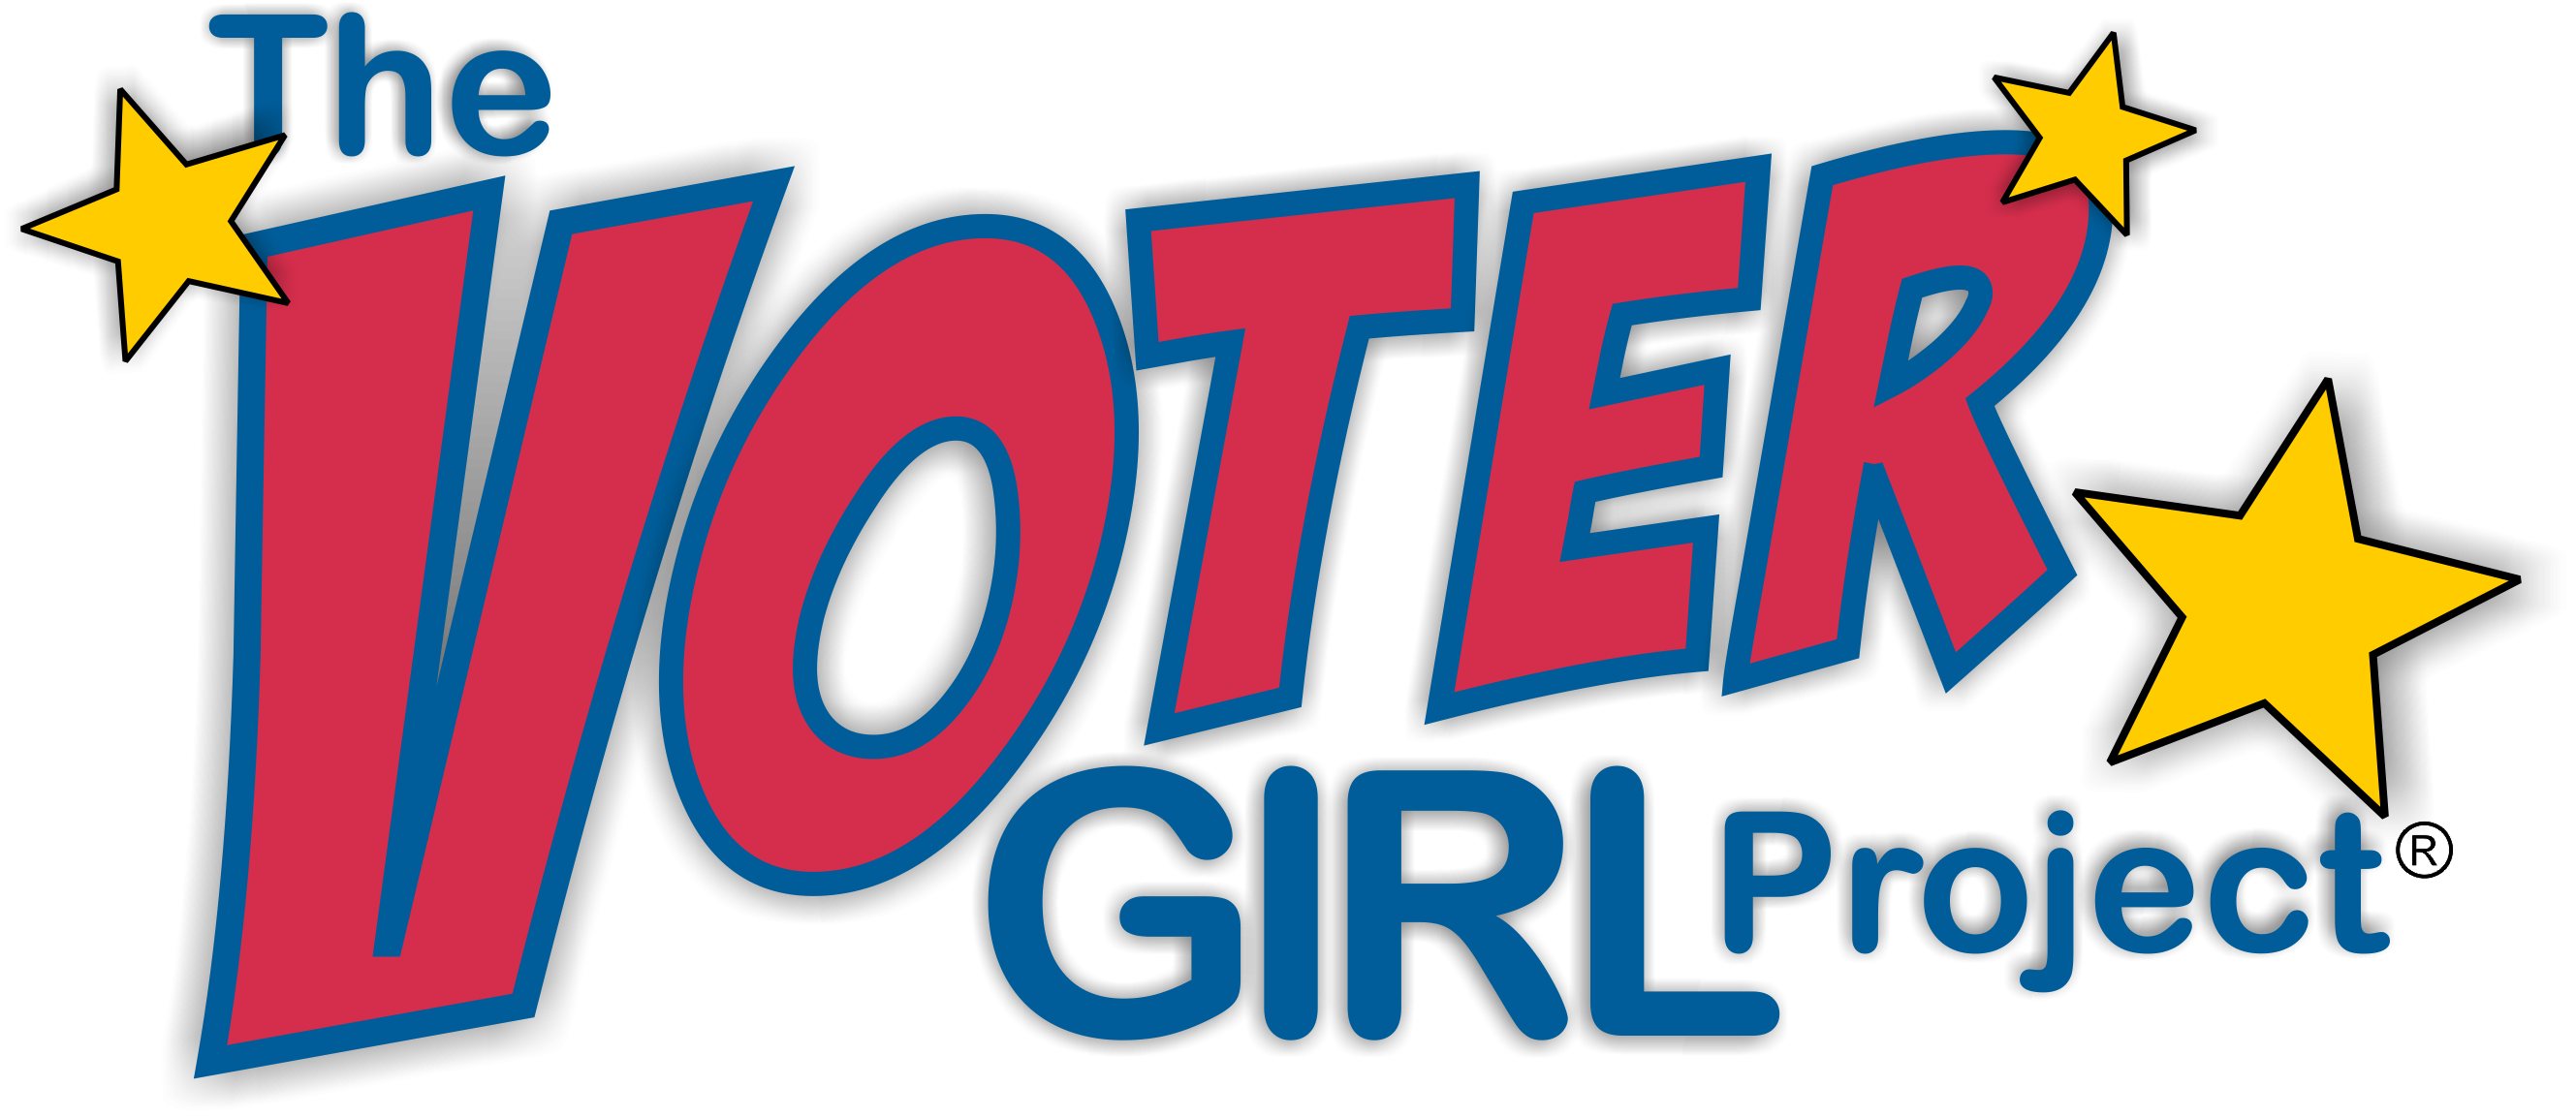 VOTER GIRL Project